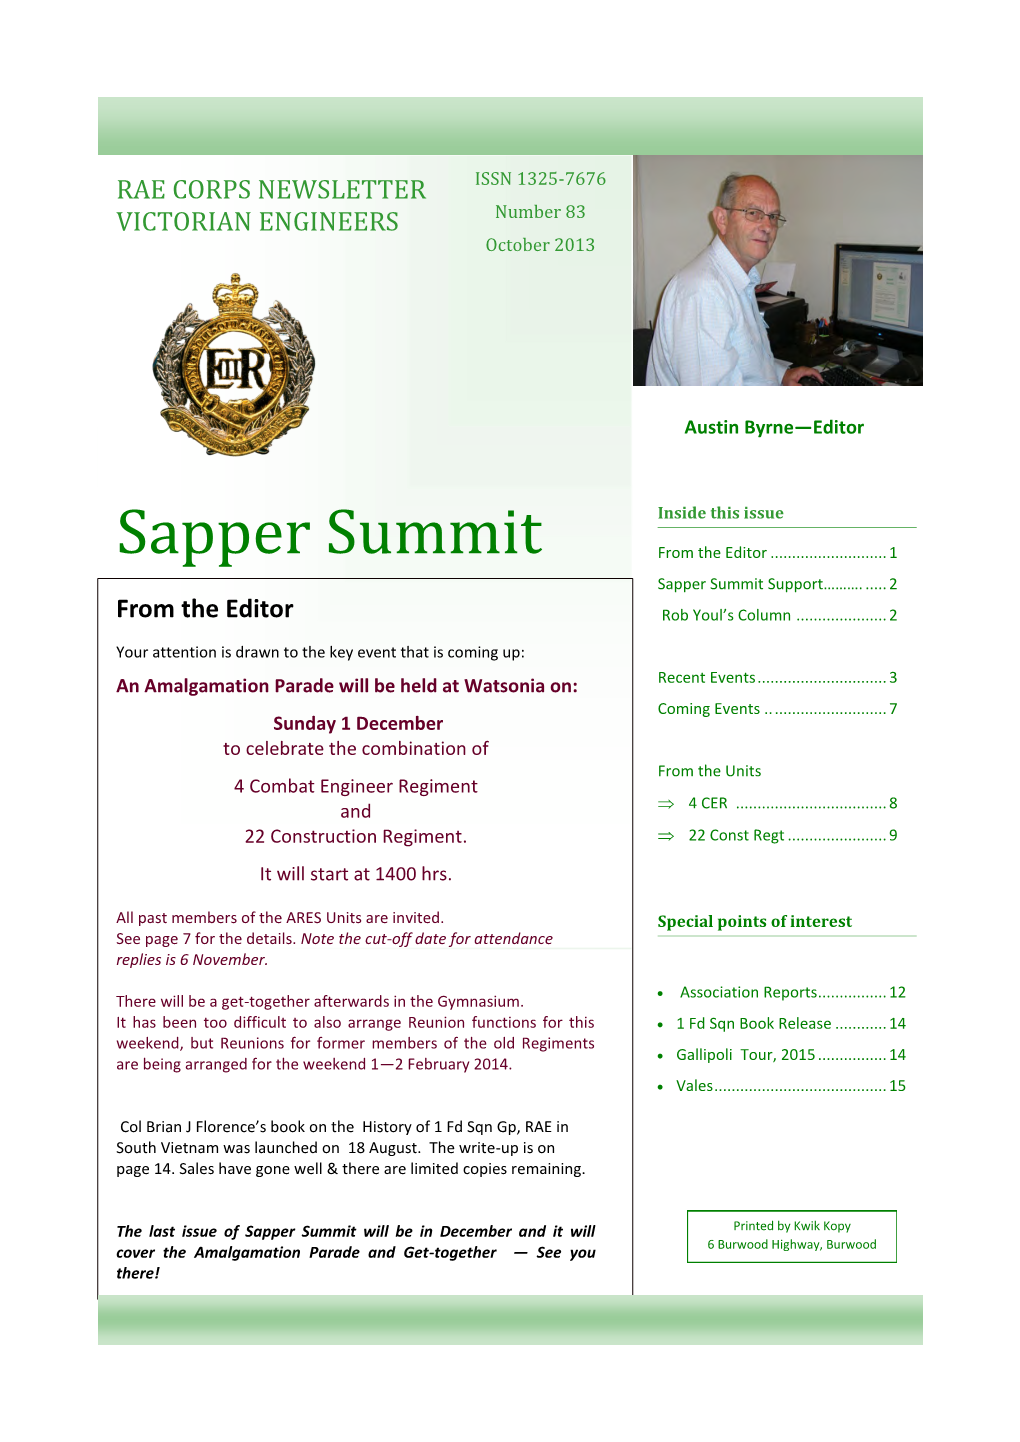 Sapper Summit from the Editor